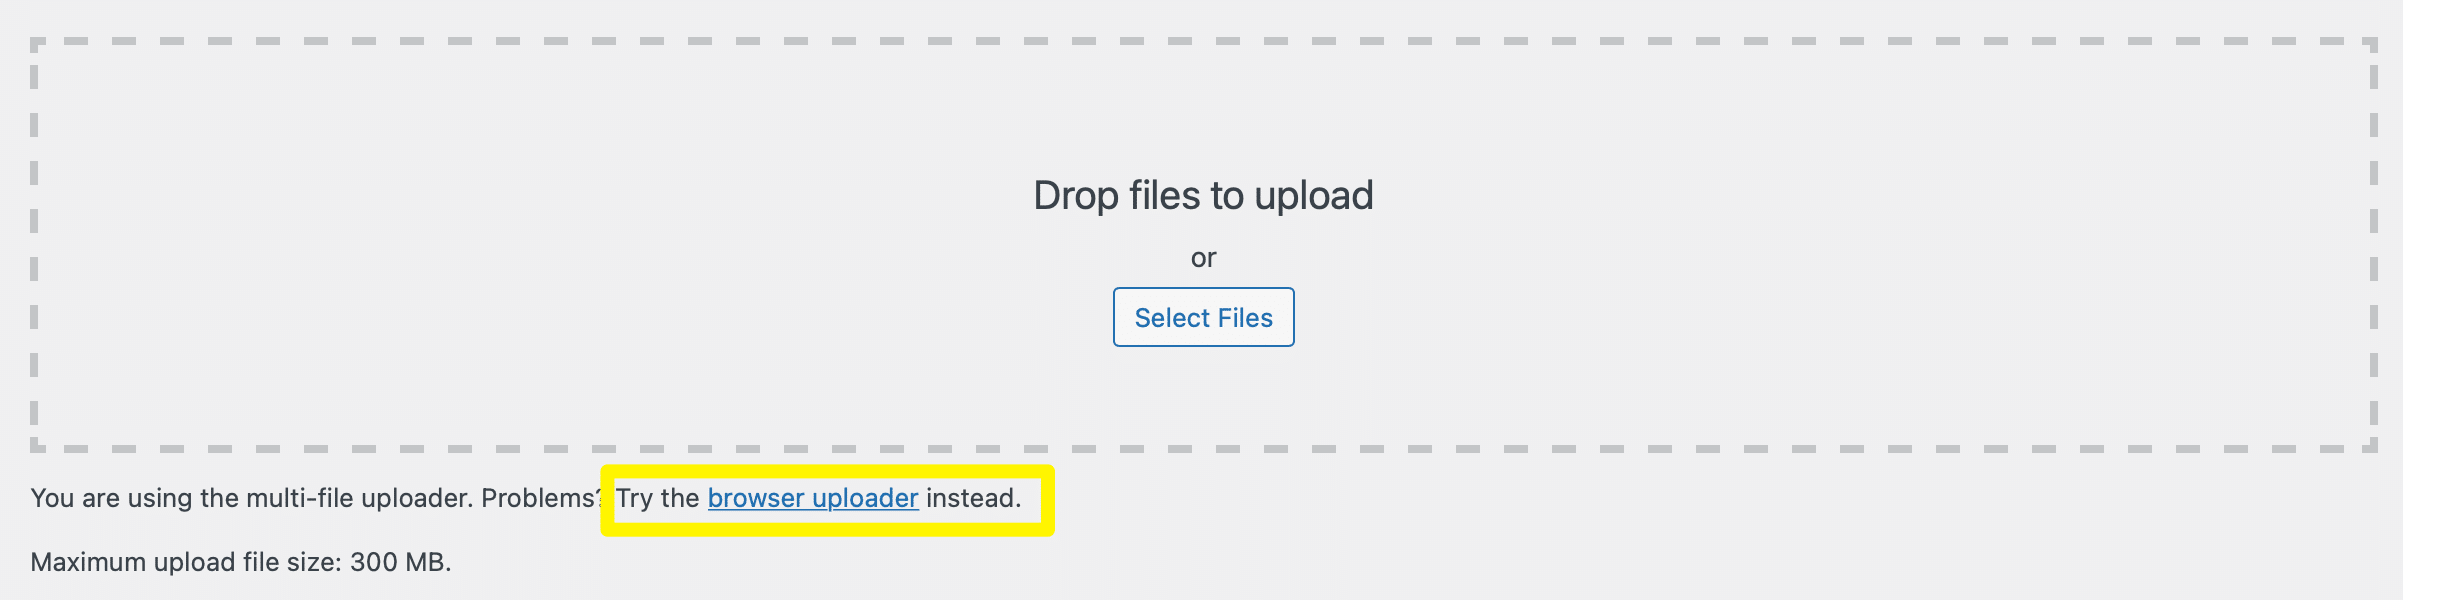 Try the browser uploader to resolve "The uploaded file could not be moved to wp-content/uploads/" error